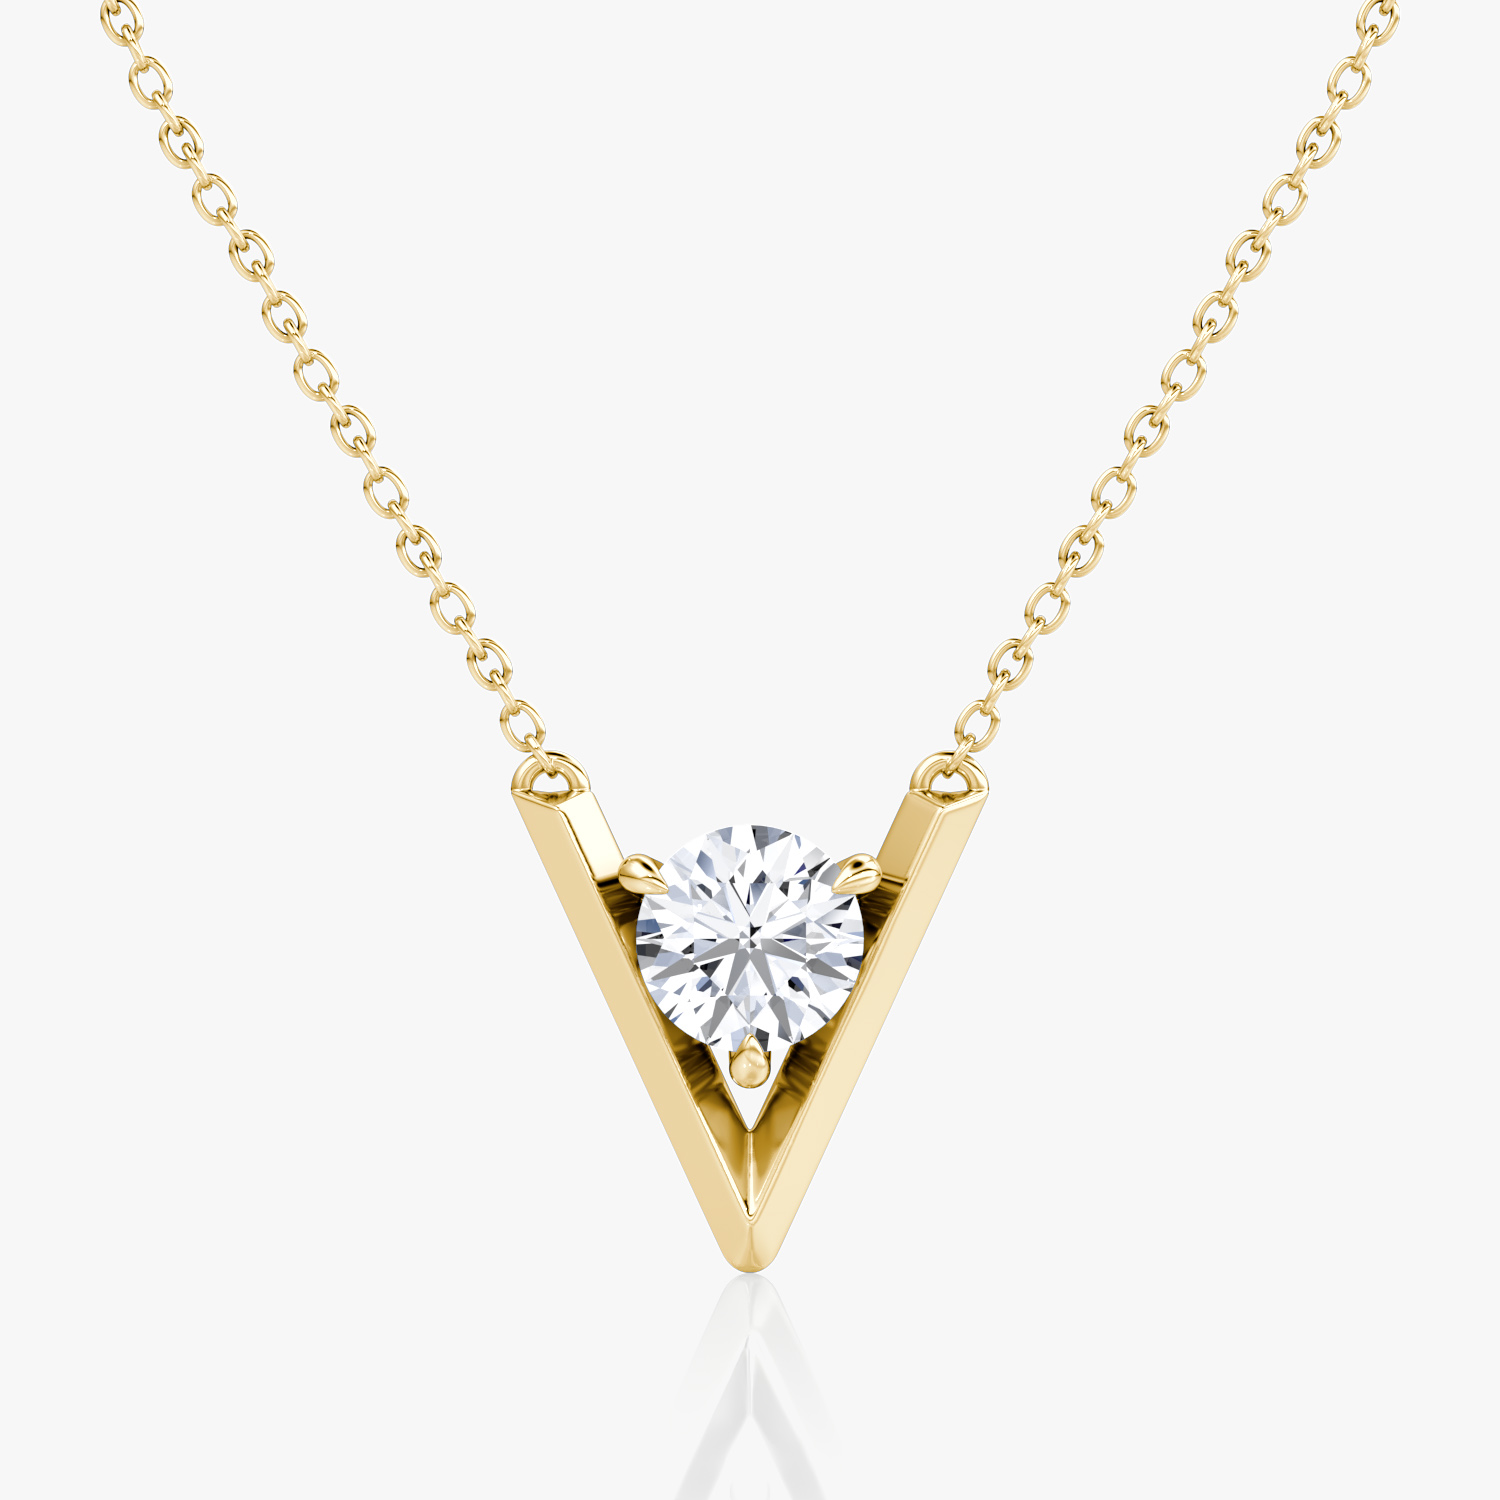 14k Gold and Diamond Necklace Set with pressure setting – G. K. Ratnam